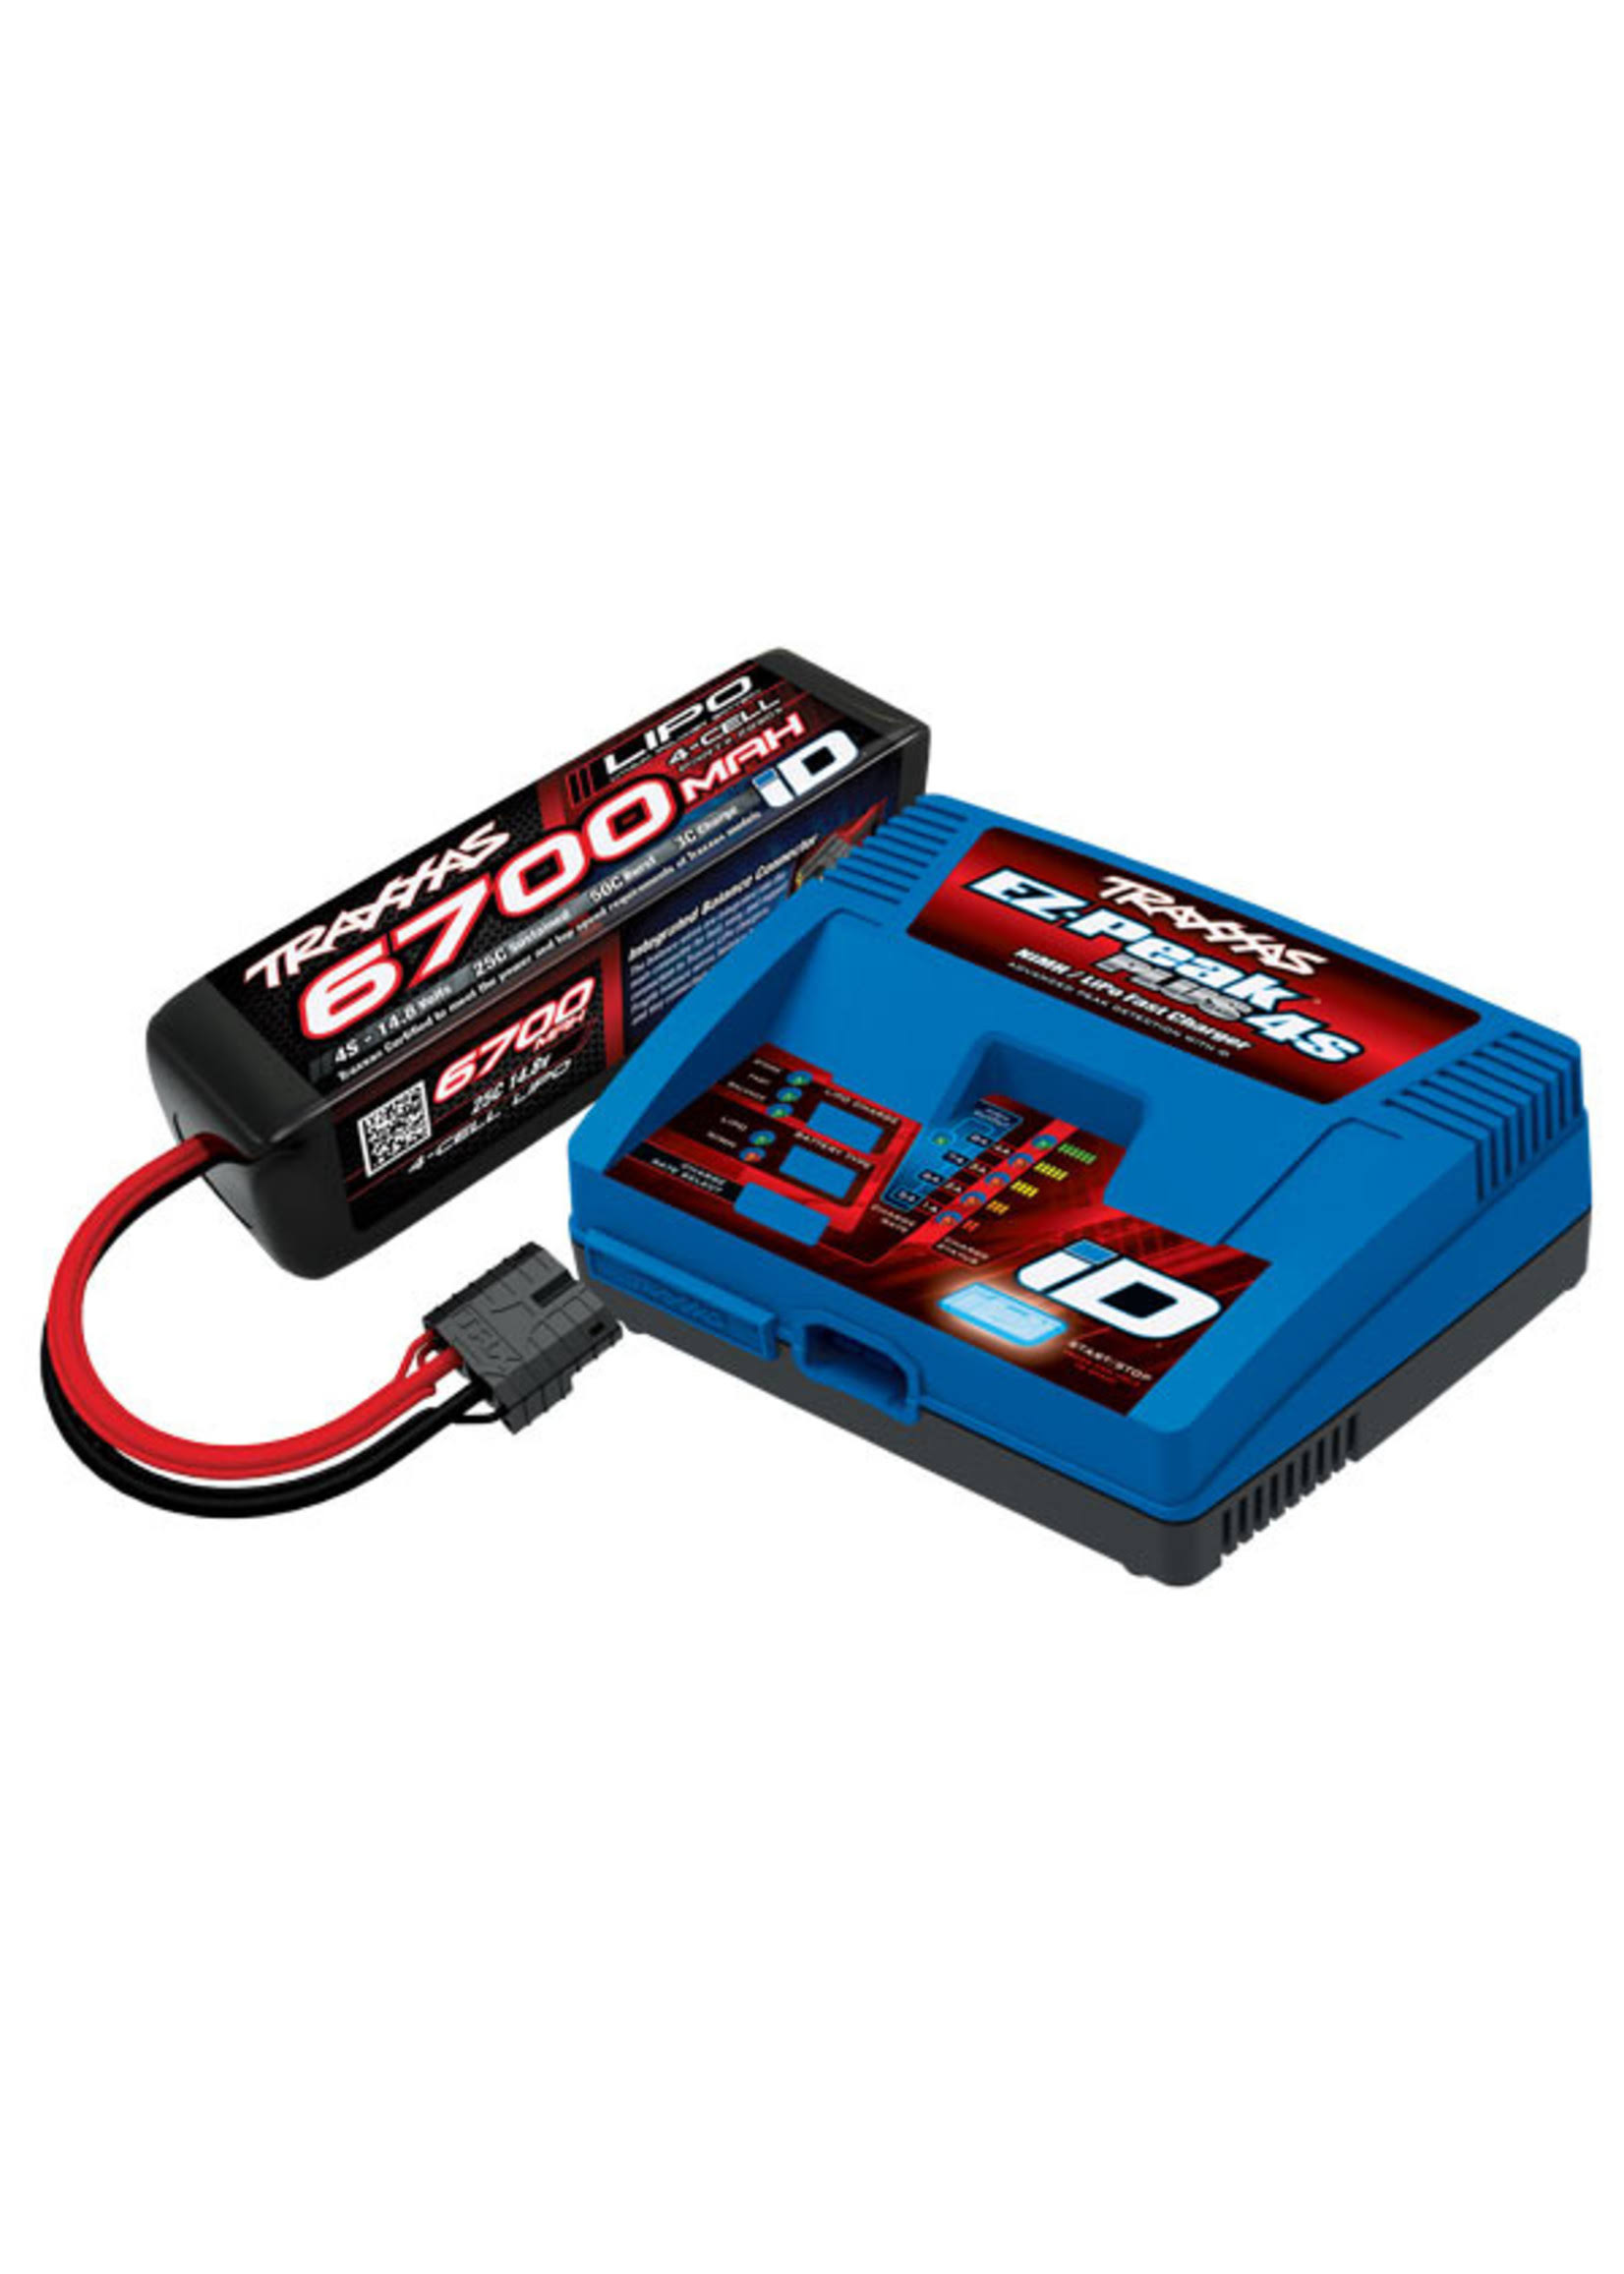 Traxxas 2998 4S Lipo 25C 6700mAh Battery/Charger Completer Kit